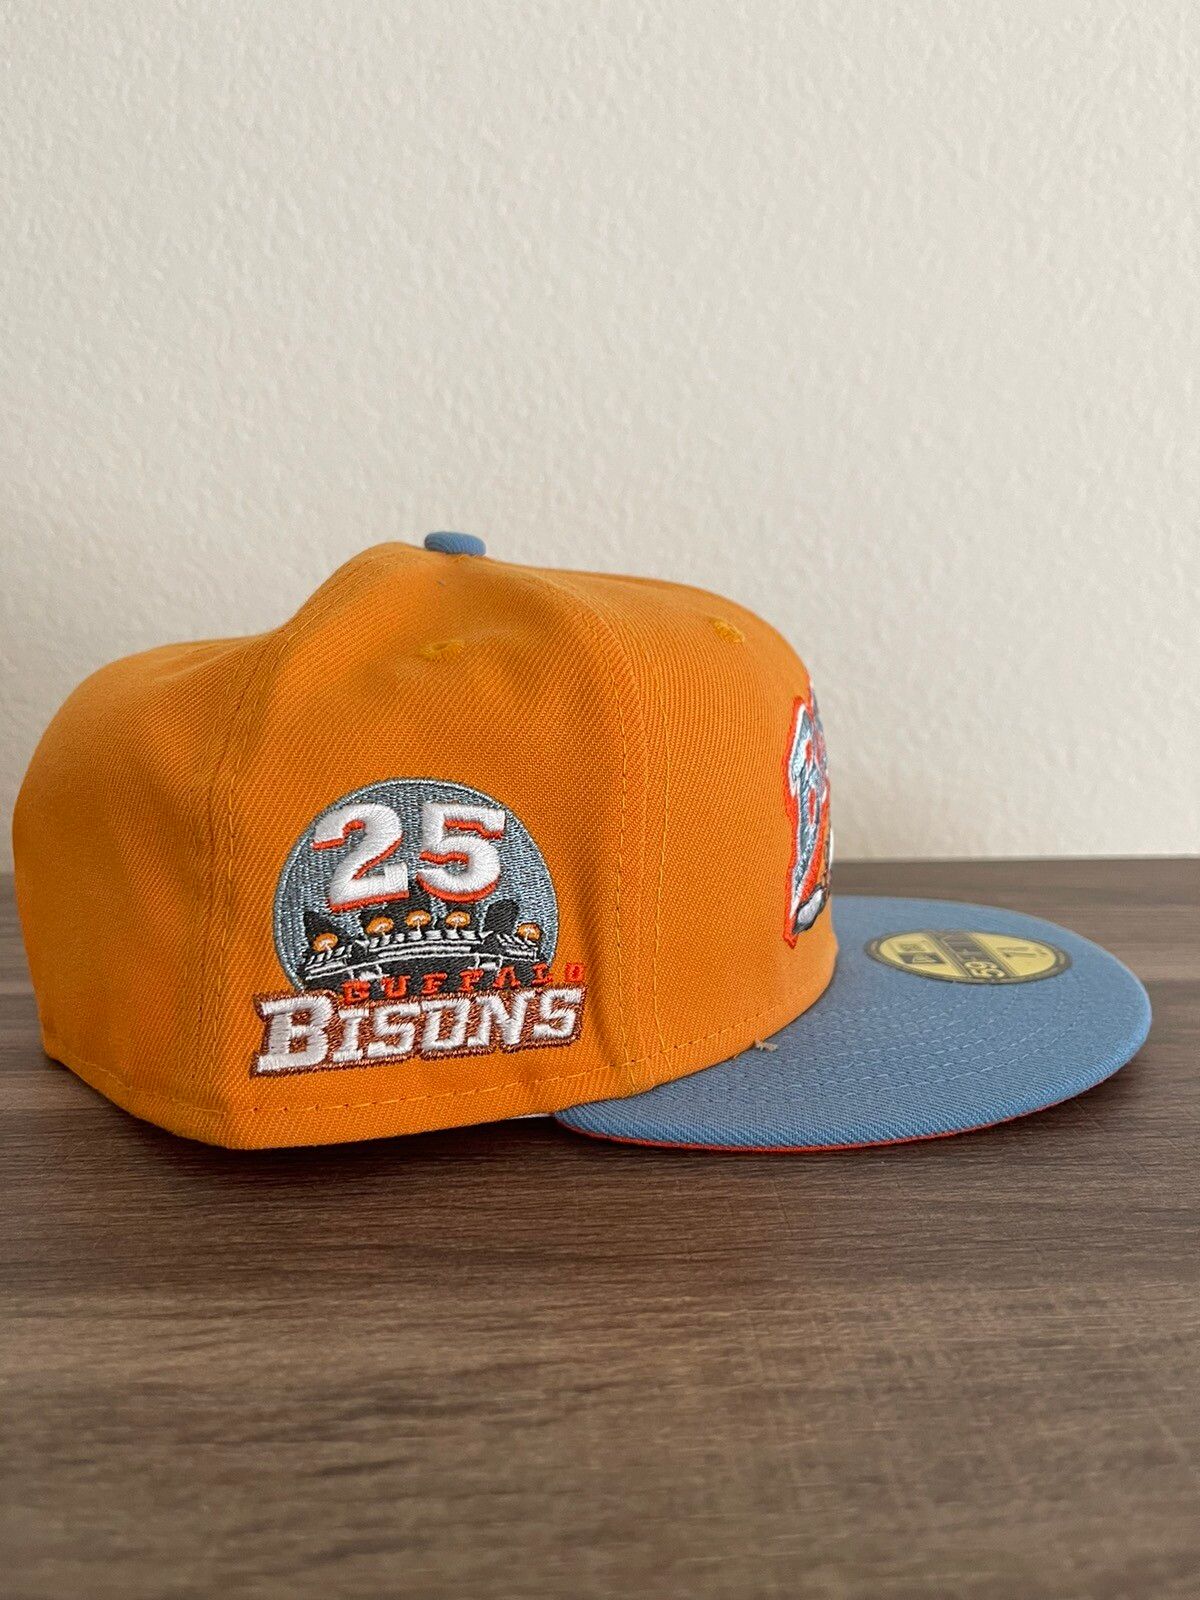 New Era Topperz Buffalo Bisons Iced Orange Edition - Size 7 5/8 Size ONE SIZE - 2 Preview